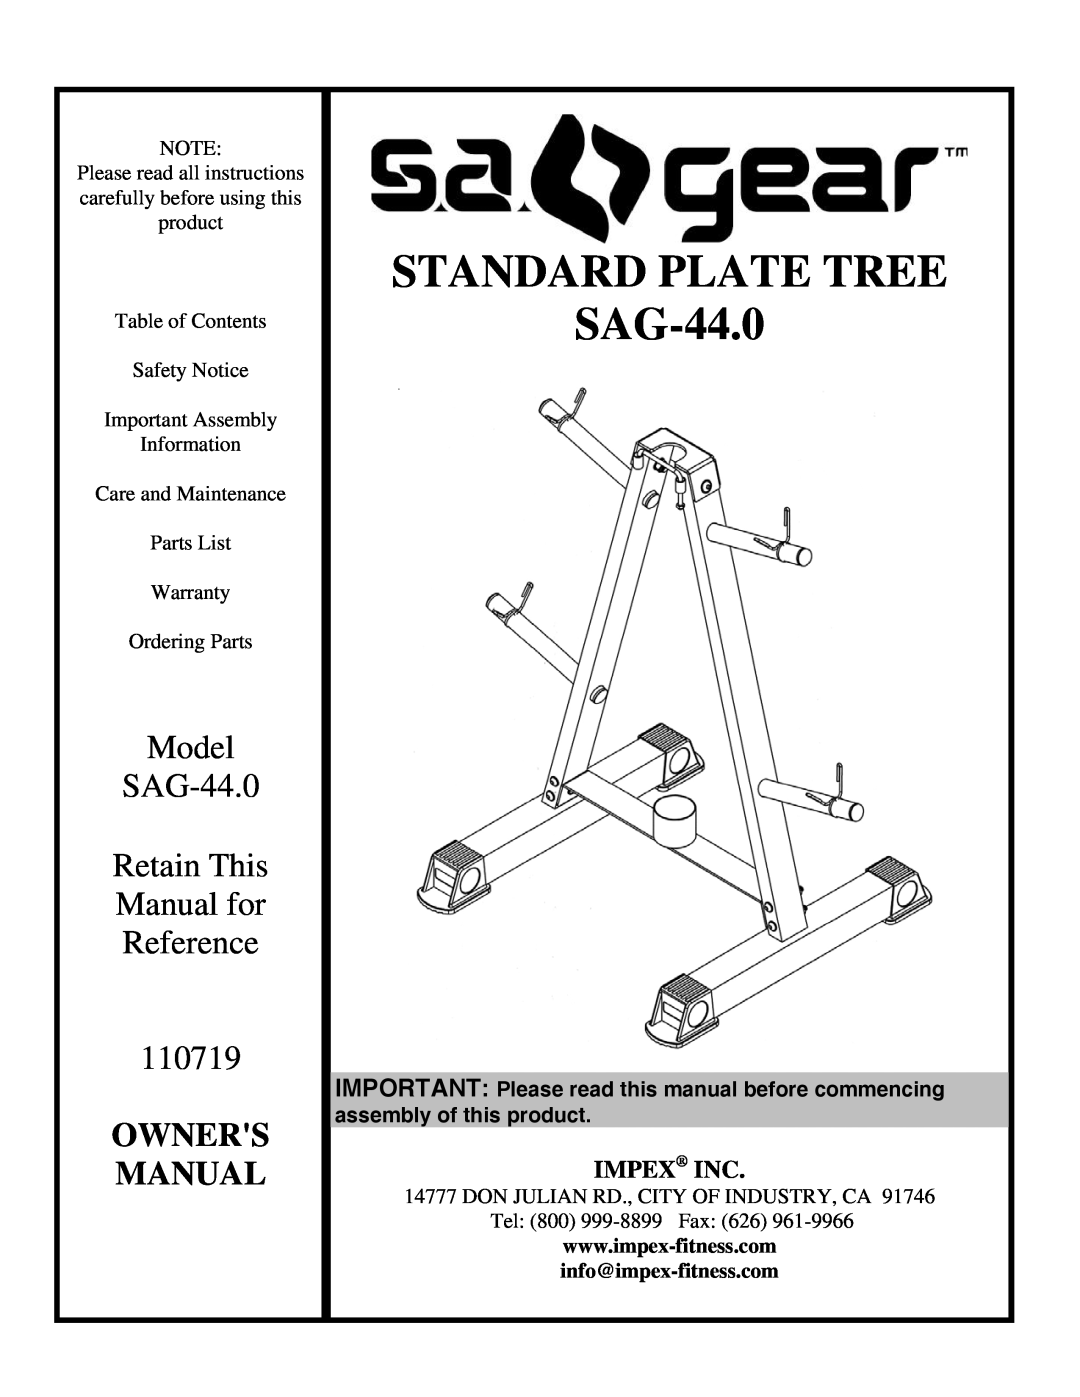 Impex manual STANDARD PLATE TREE SAG-44.0, Model SAG-44.0 Retain This Manual for Reference 110719, Owners Manual 